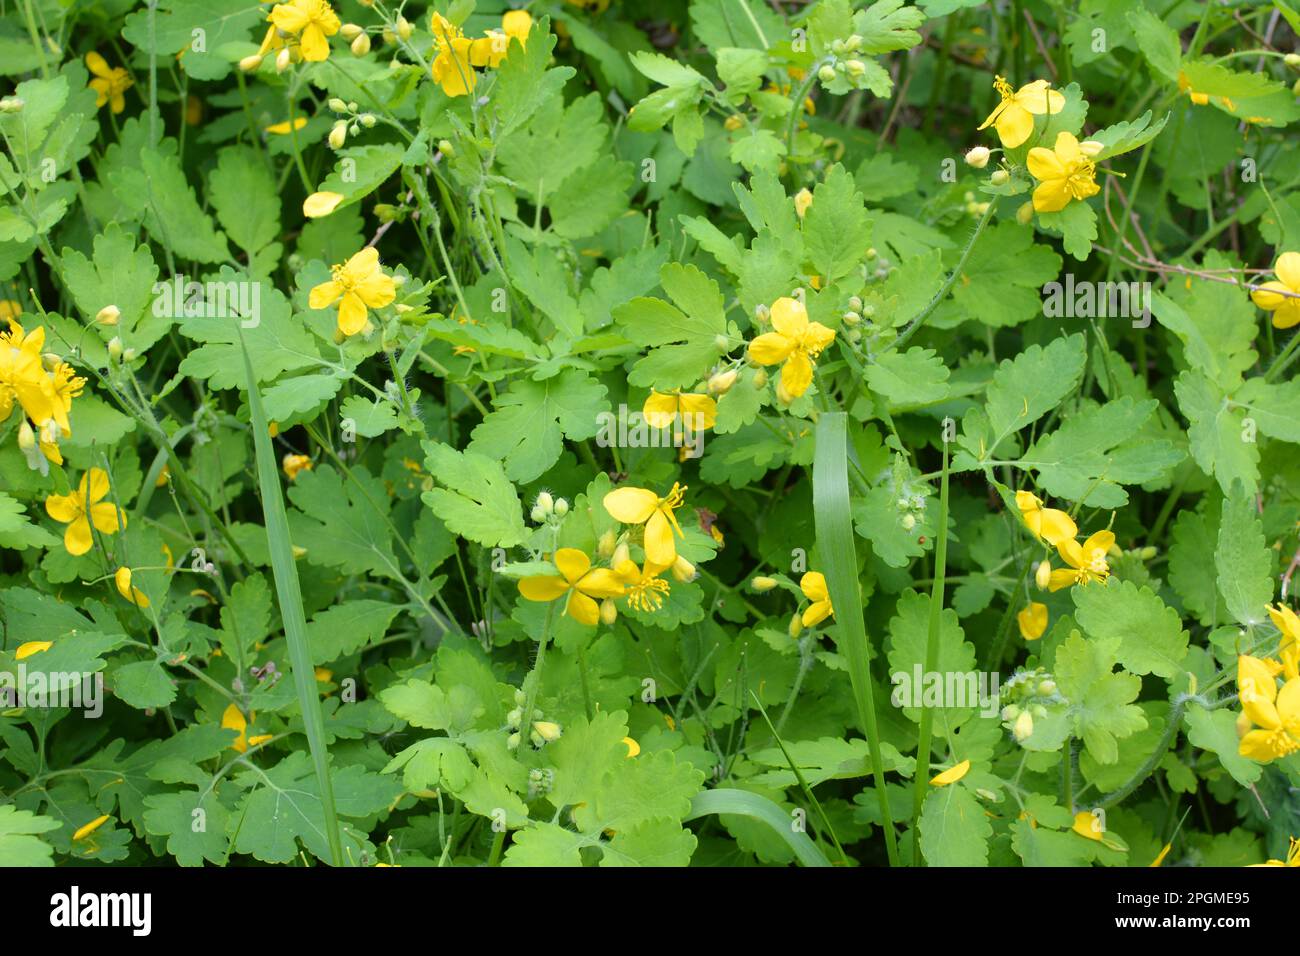 Chelidonium majus with leaves and yellow flowers, growing in the wild Stock Photo